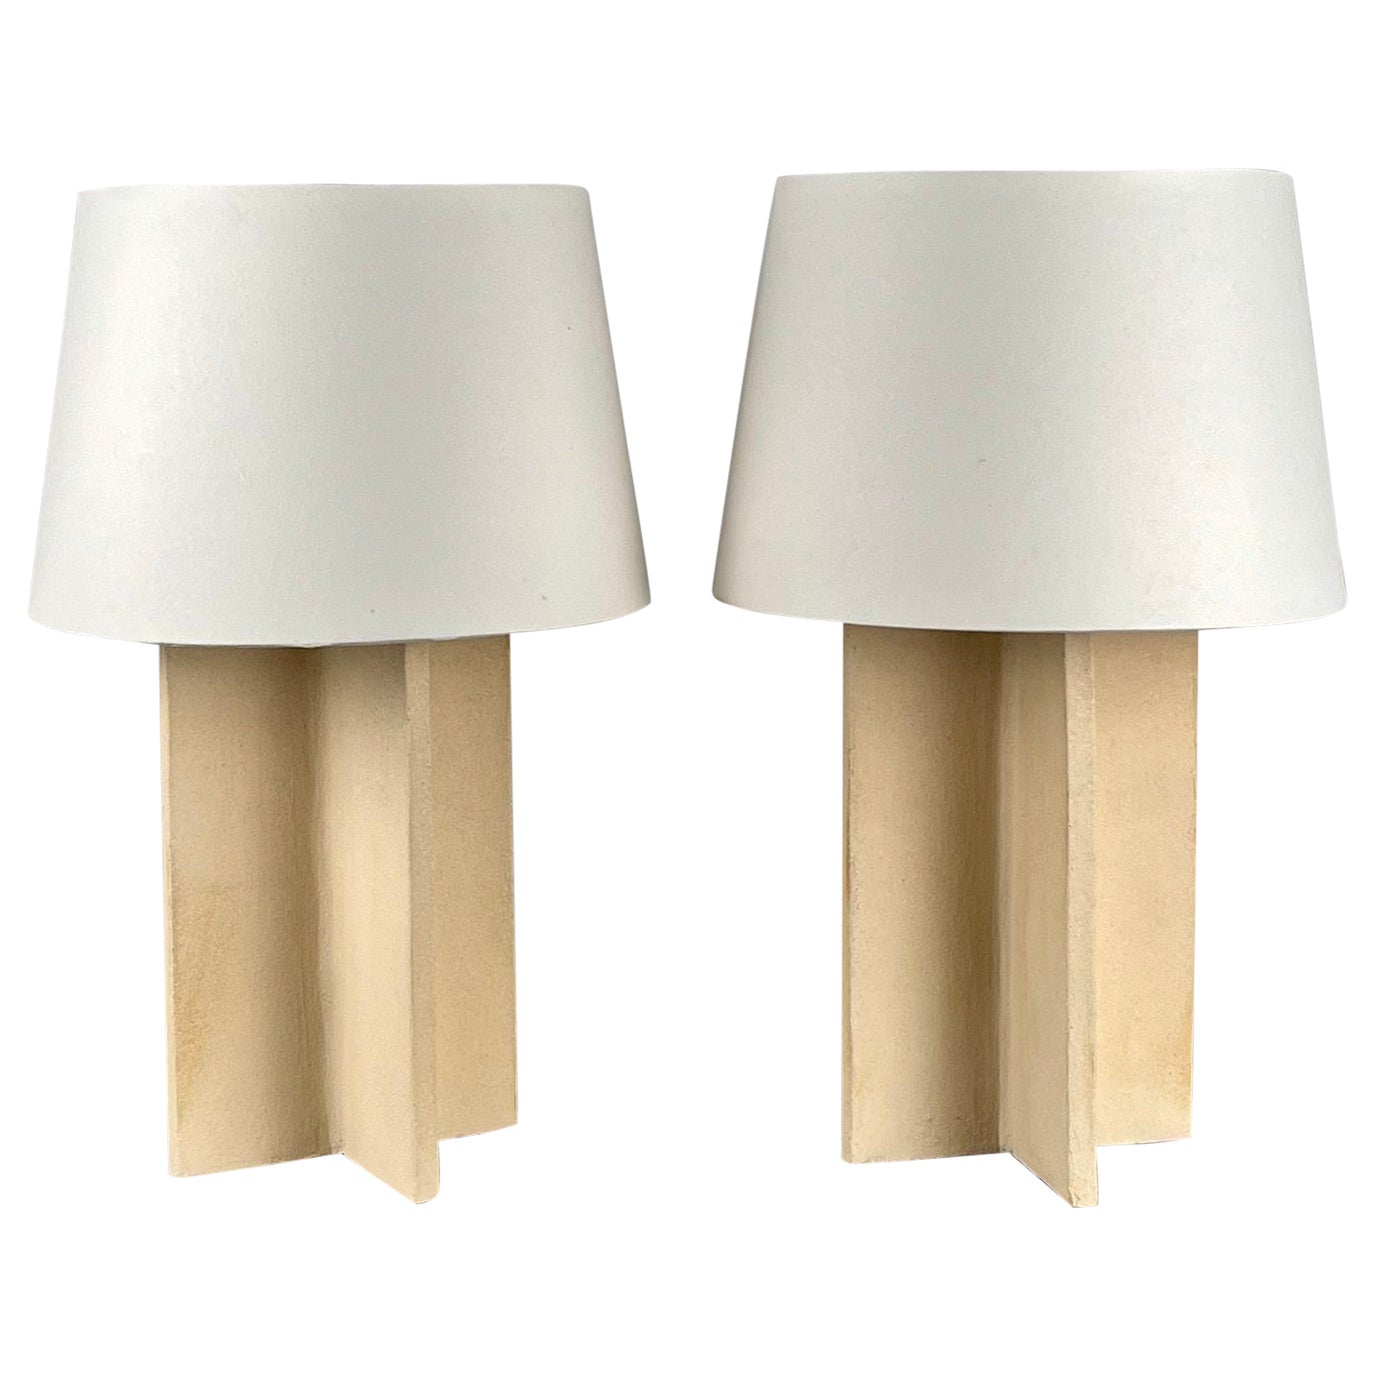 Pair of 'Croisillon' Cream Ceramic Lamps with Parchment Shades by Design Frères For Sale